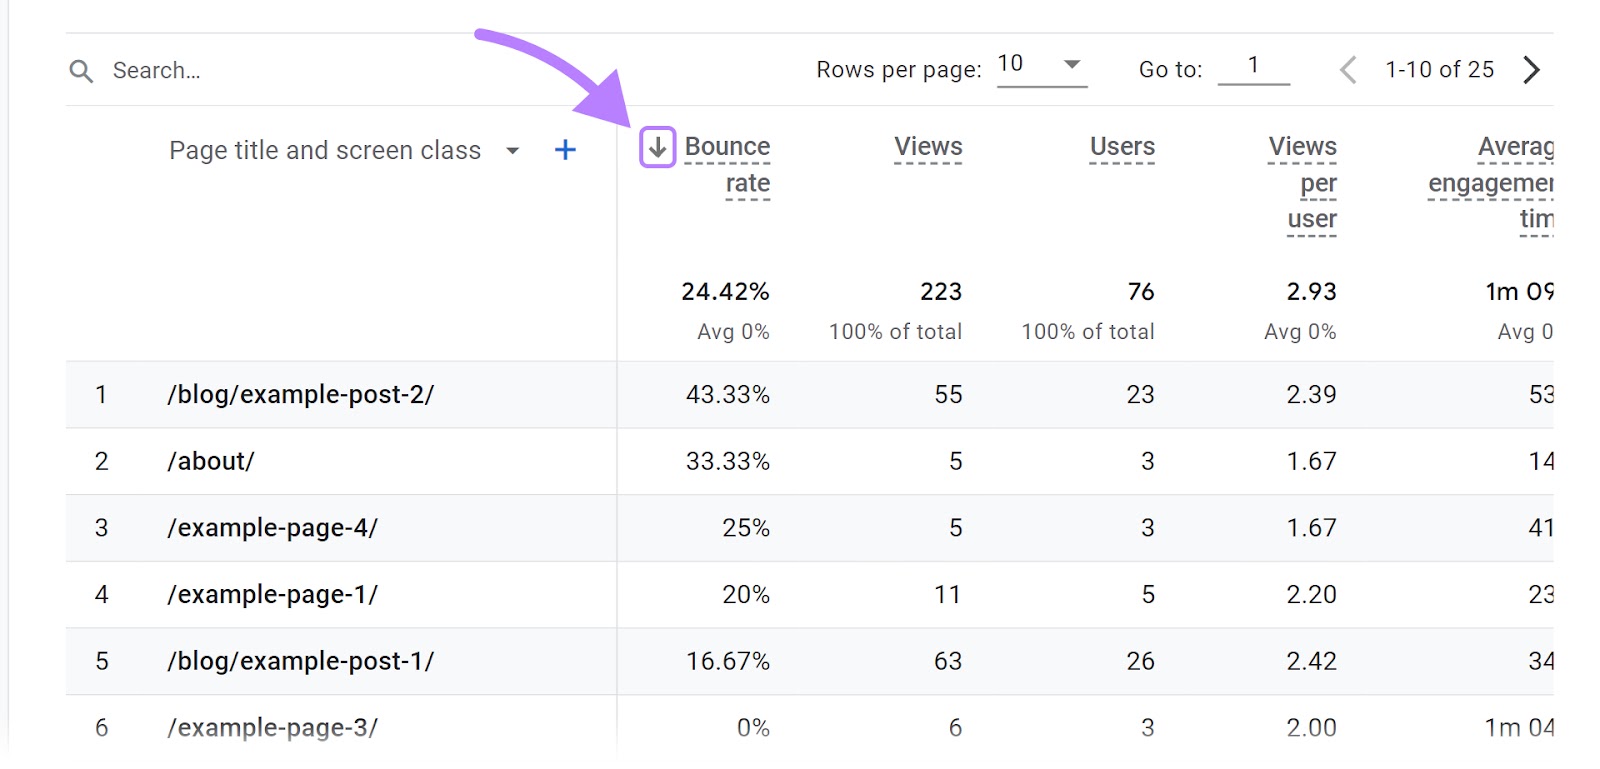 Filtering the report by high bounce rate pages